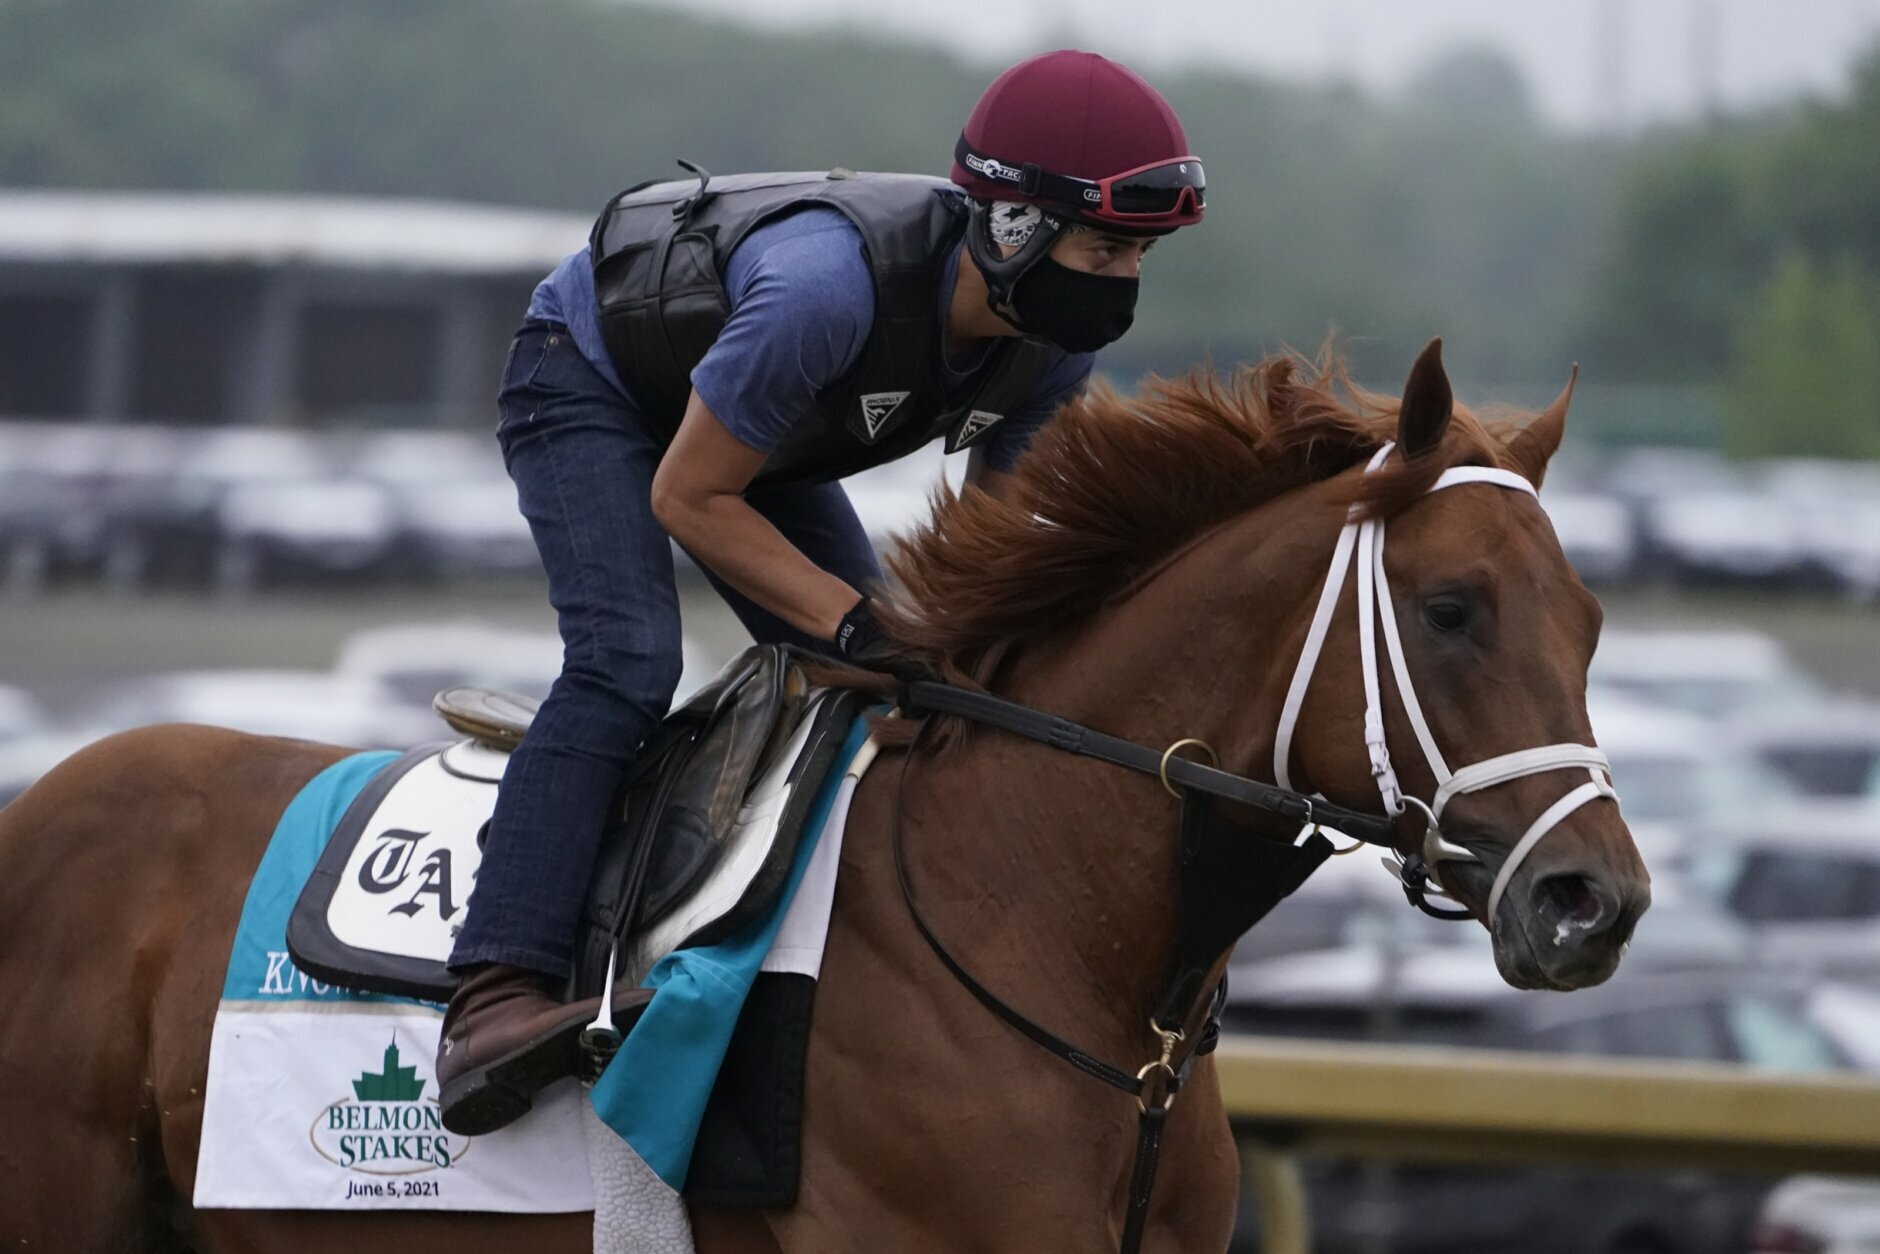 ‘Formidable group’ of horses finish Triple Crown at Belmont WTOP News